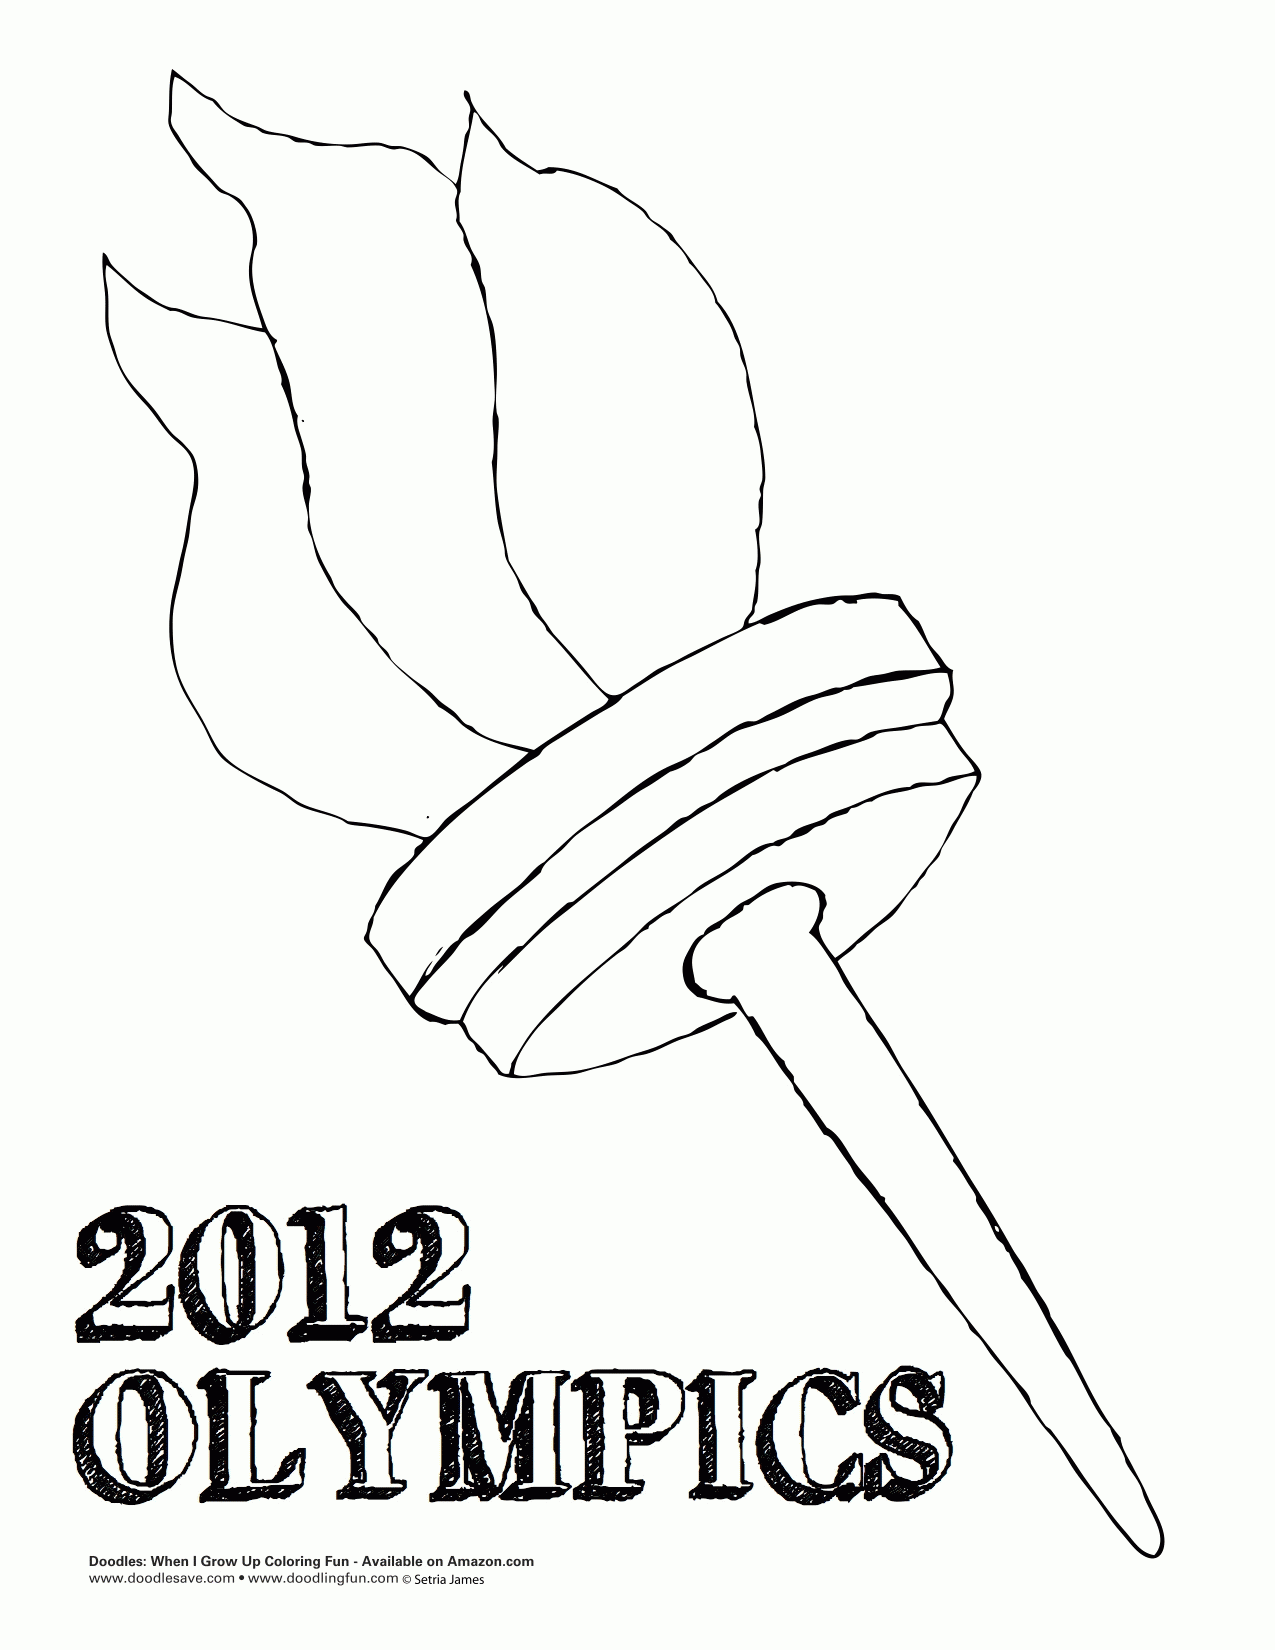 Olympic Torch Coloring Page
